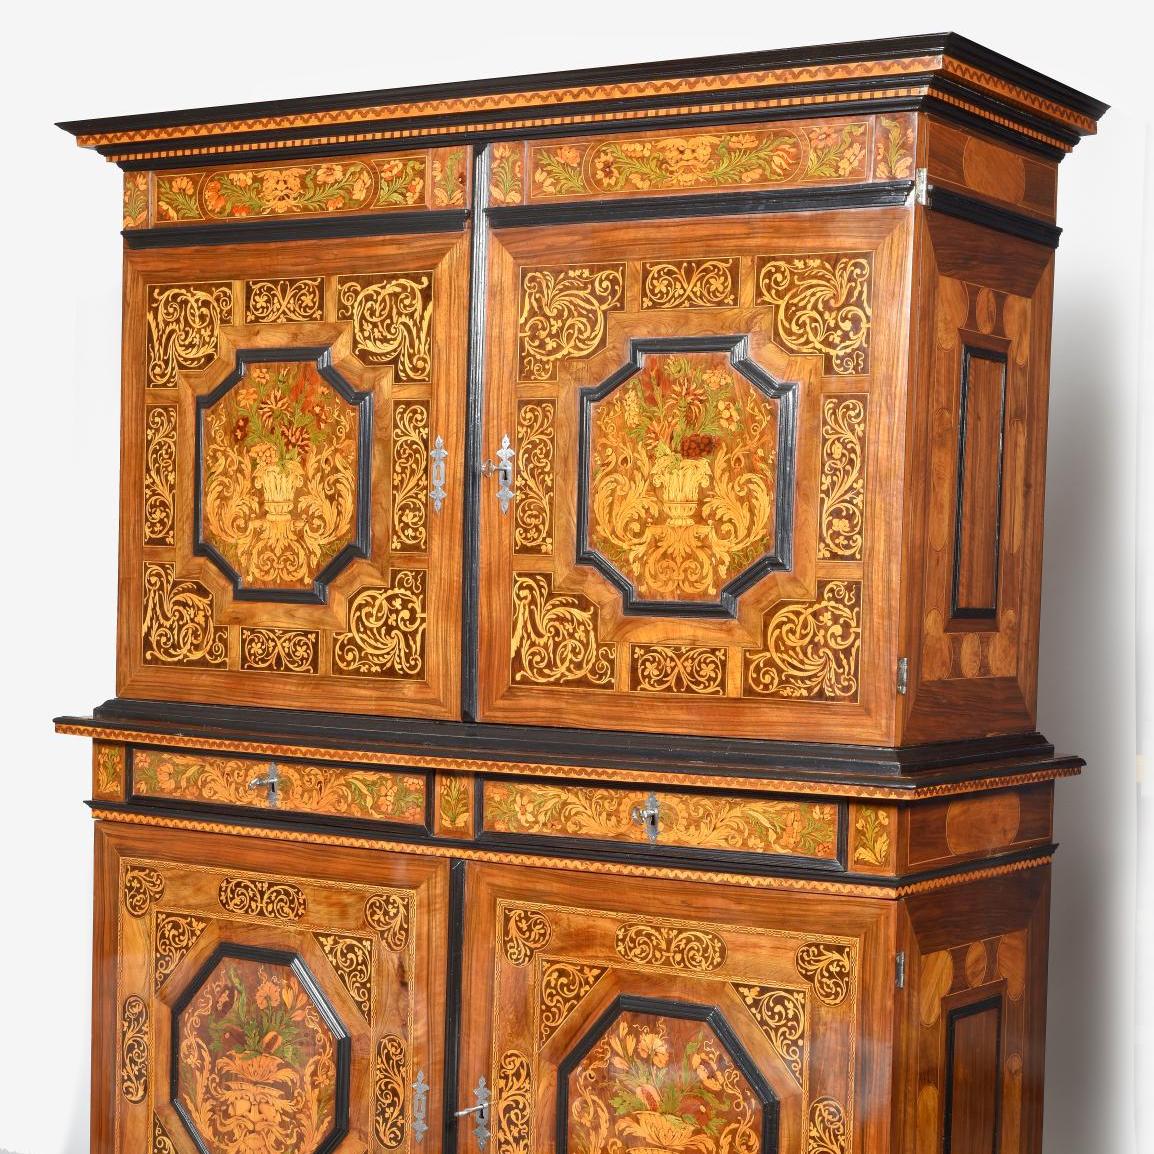 A Thomas Hache Cabinet Makes its First Appearance